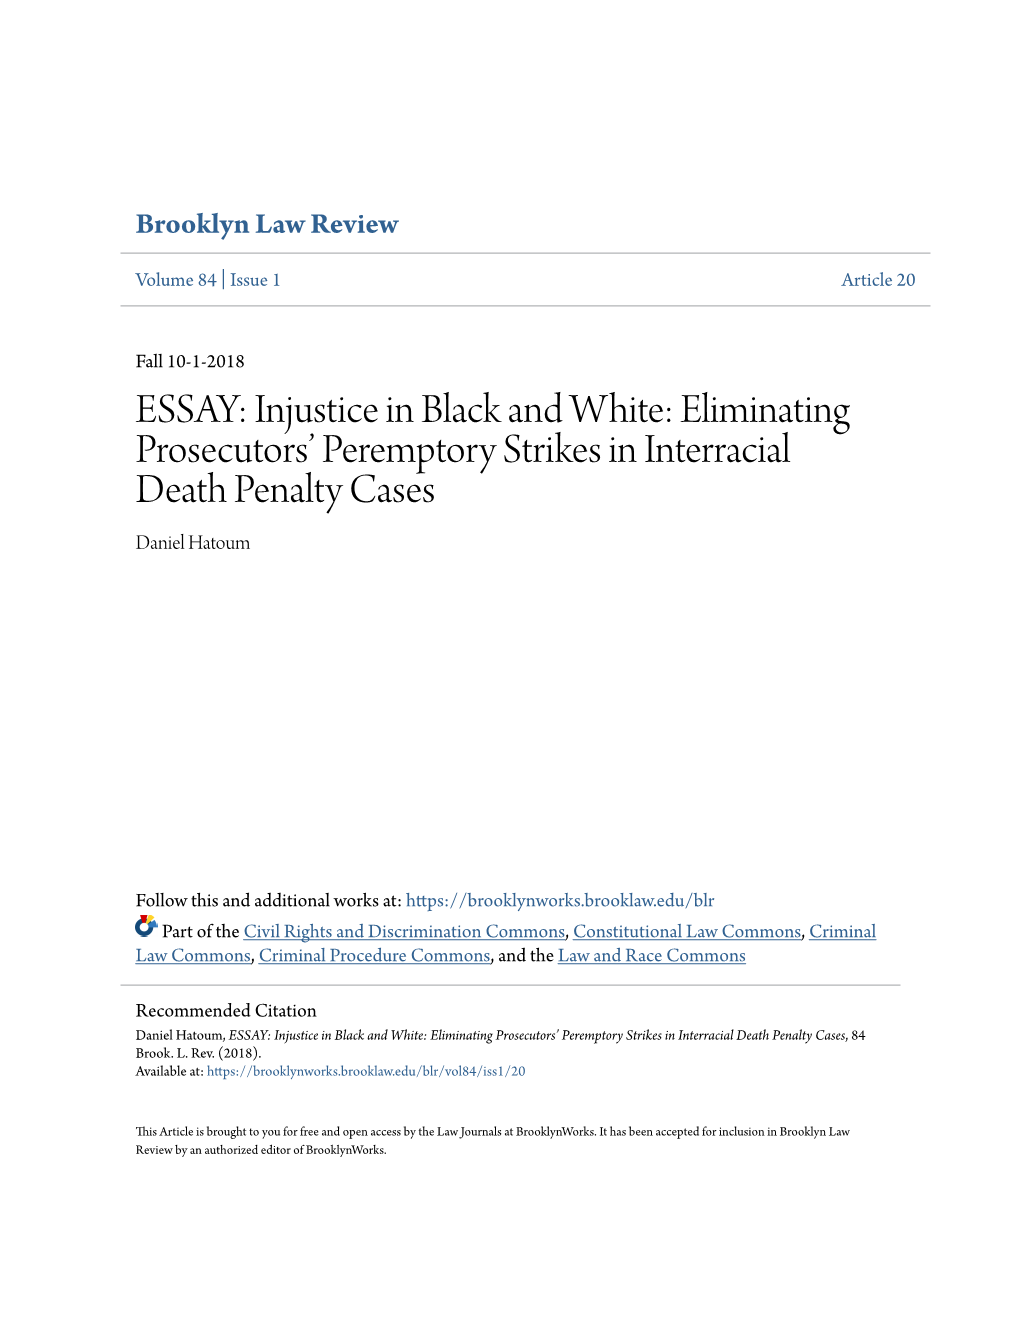 Injustice in Black and White: Eliminating Prosecutors’ Peremptory Strikes in Interracial Death Penalty Cases Daniel Hatoum